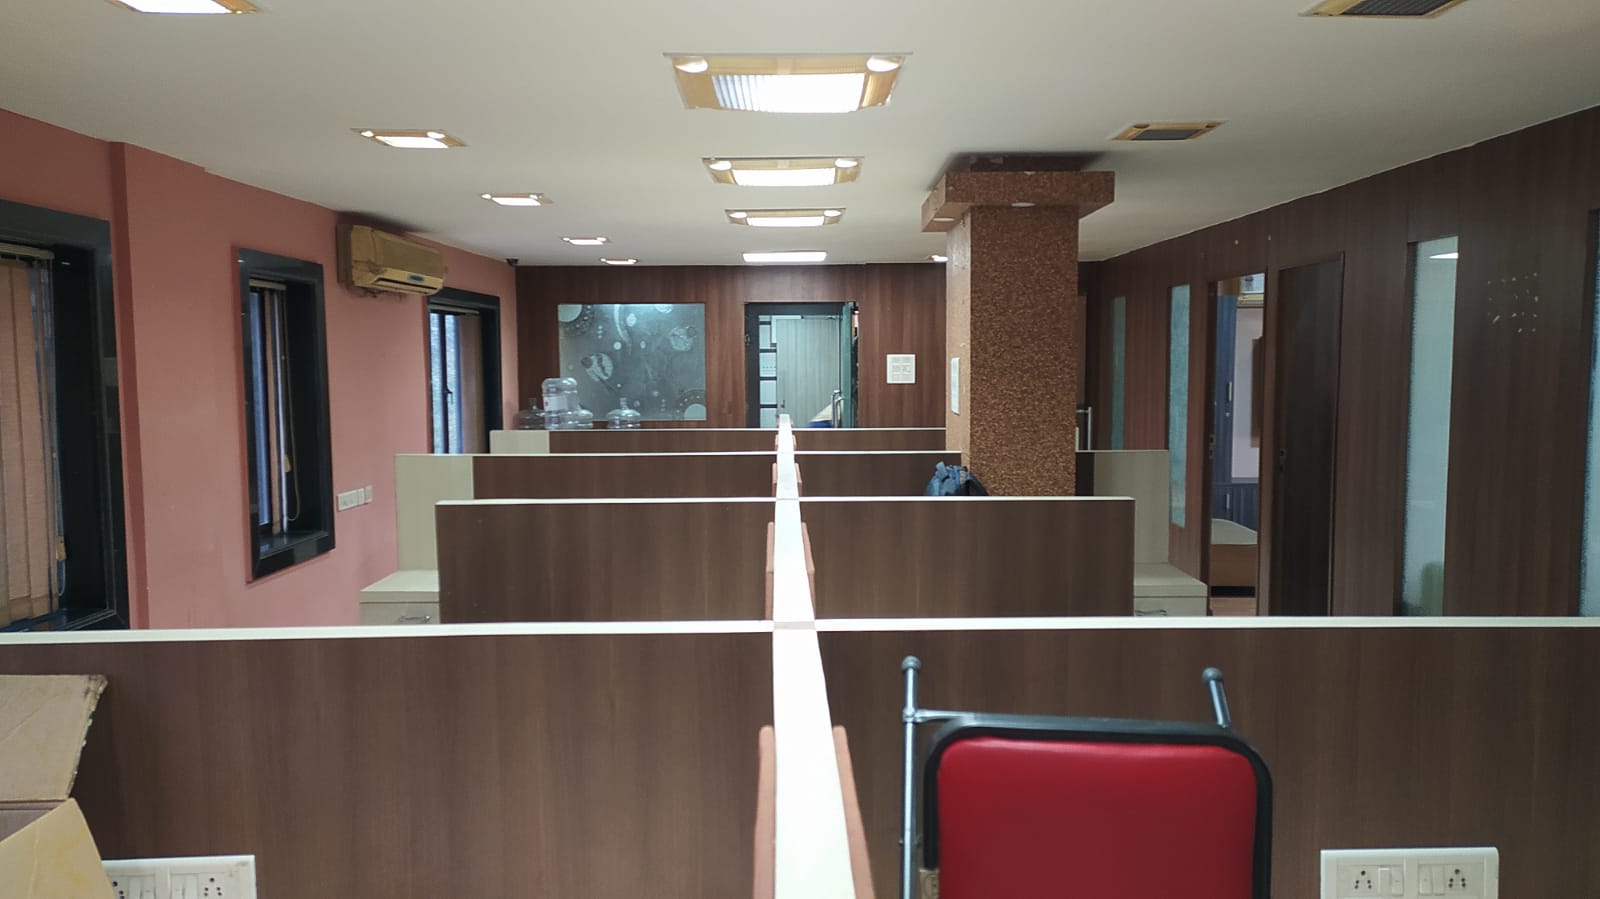 1530 Sq Feet Office Space for Rent Only in Bhowanipore